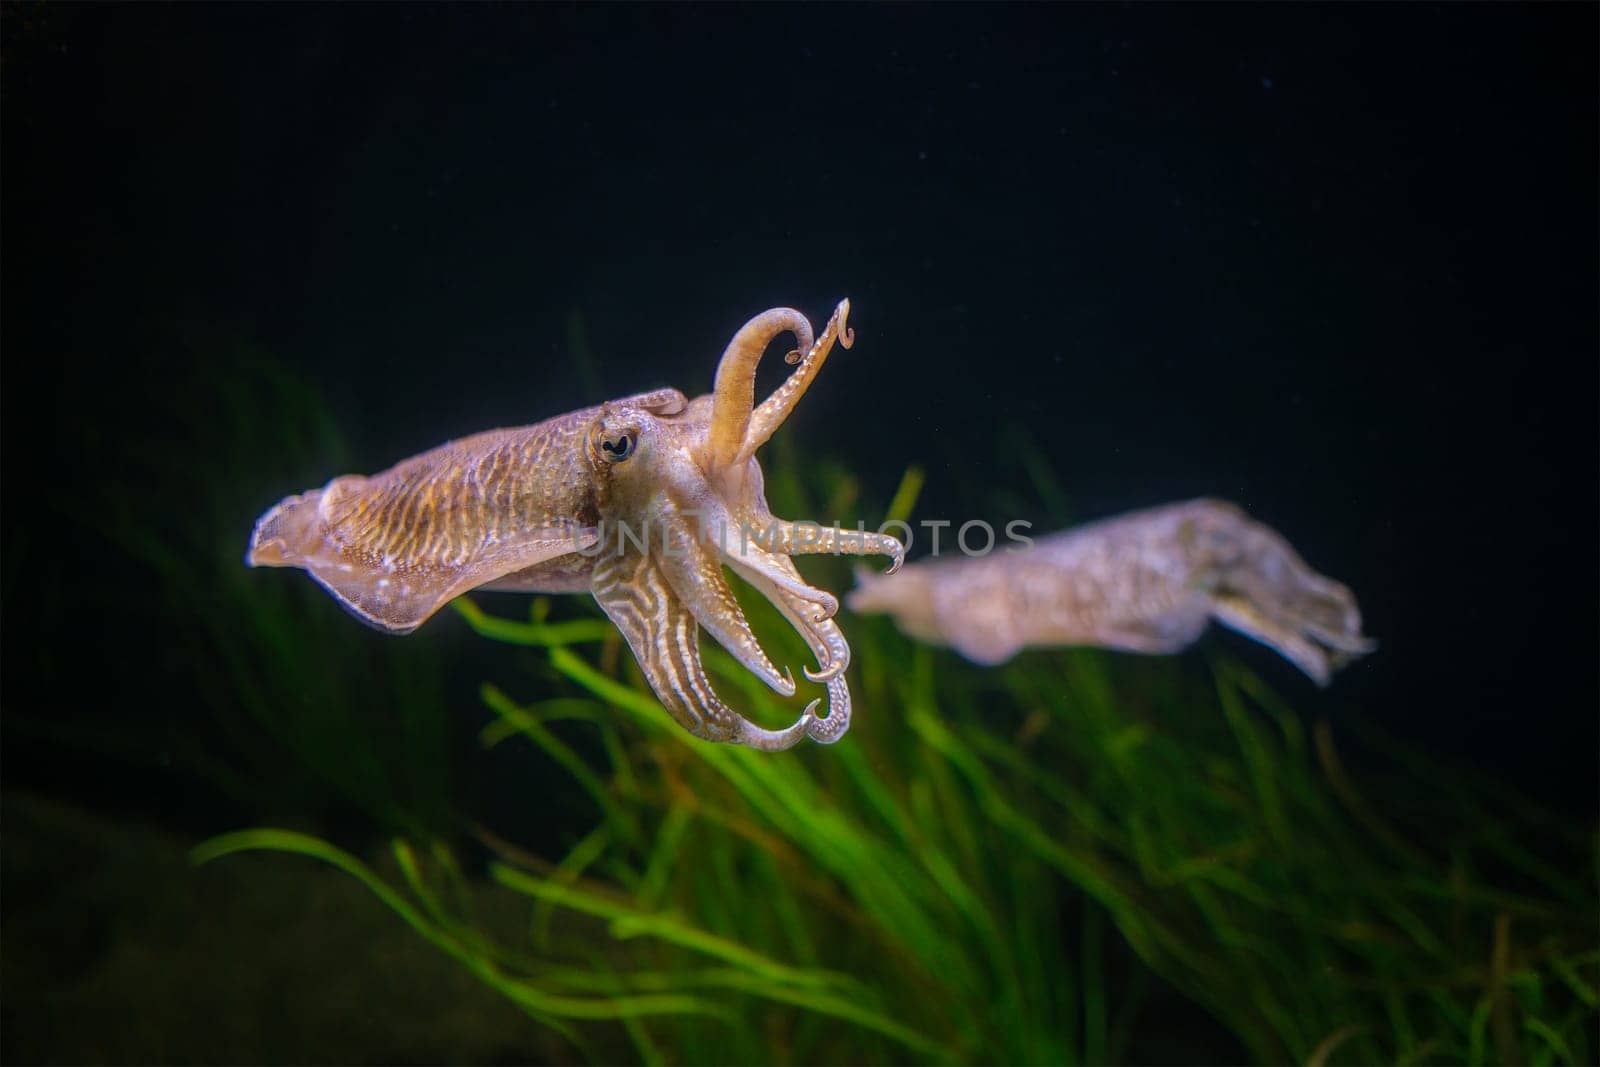 The Common European Cuttlefish Sepia Offcinalis underwater by dimol